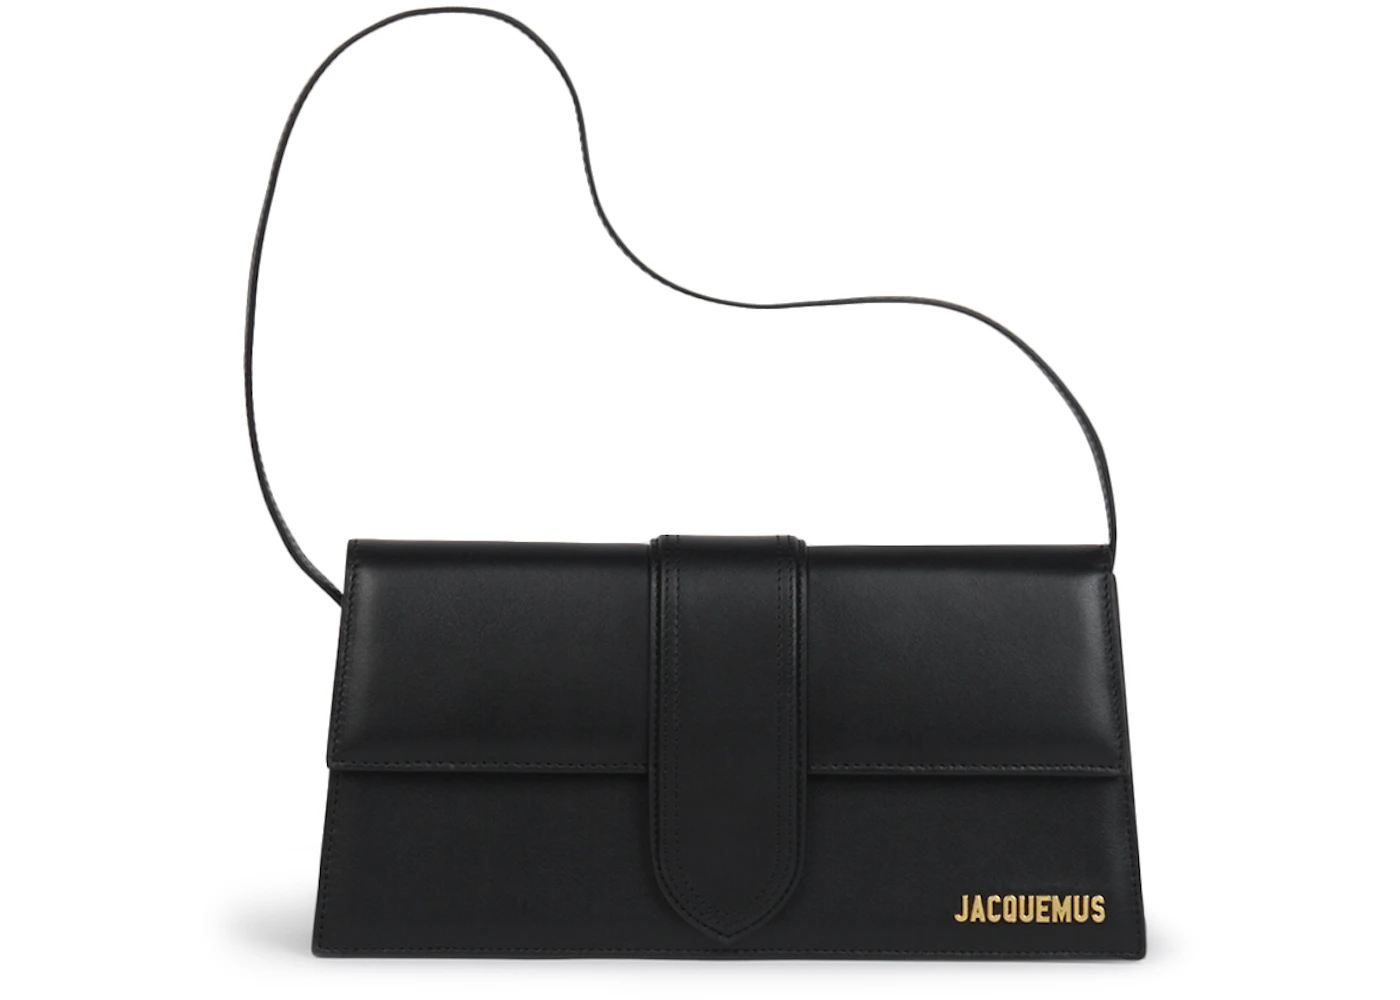 Jacquemus Le Bambino Long Shoulder Bag Black in Leather with Gold